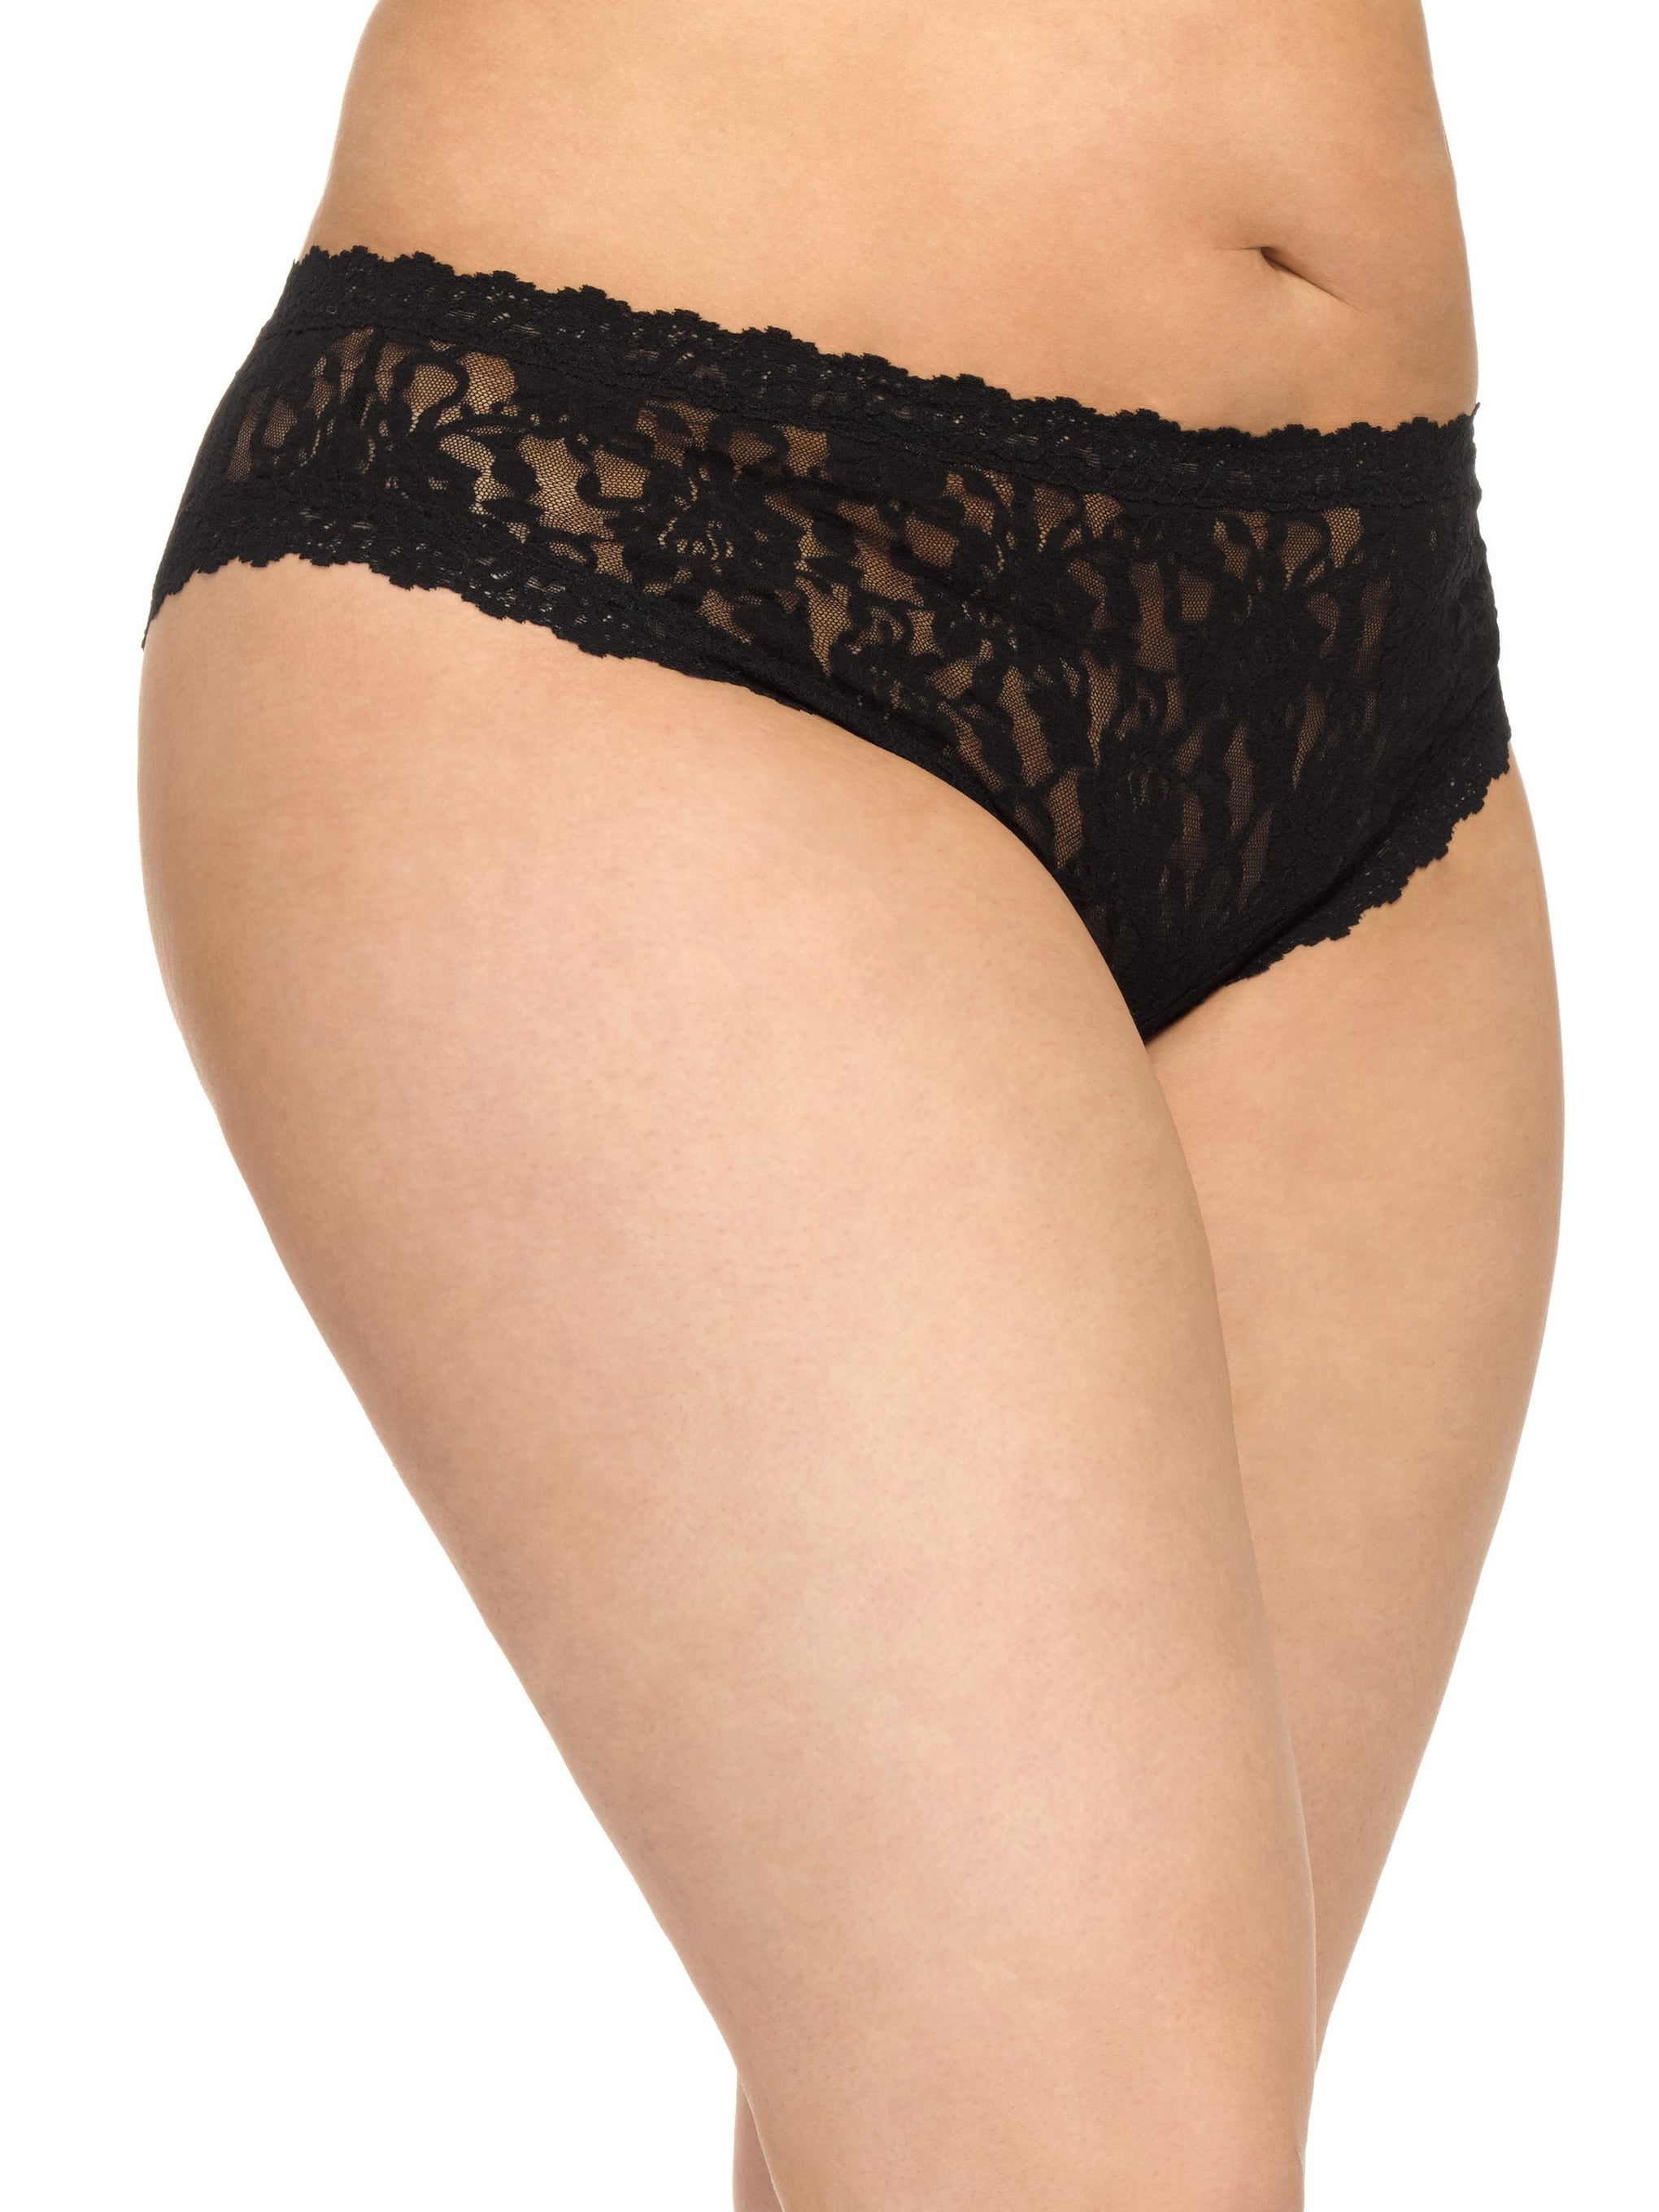 Sexy Lingerie for Women Plus Size Crotchless Full Coverage Lace